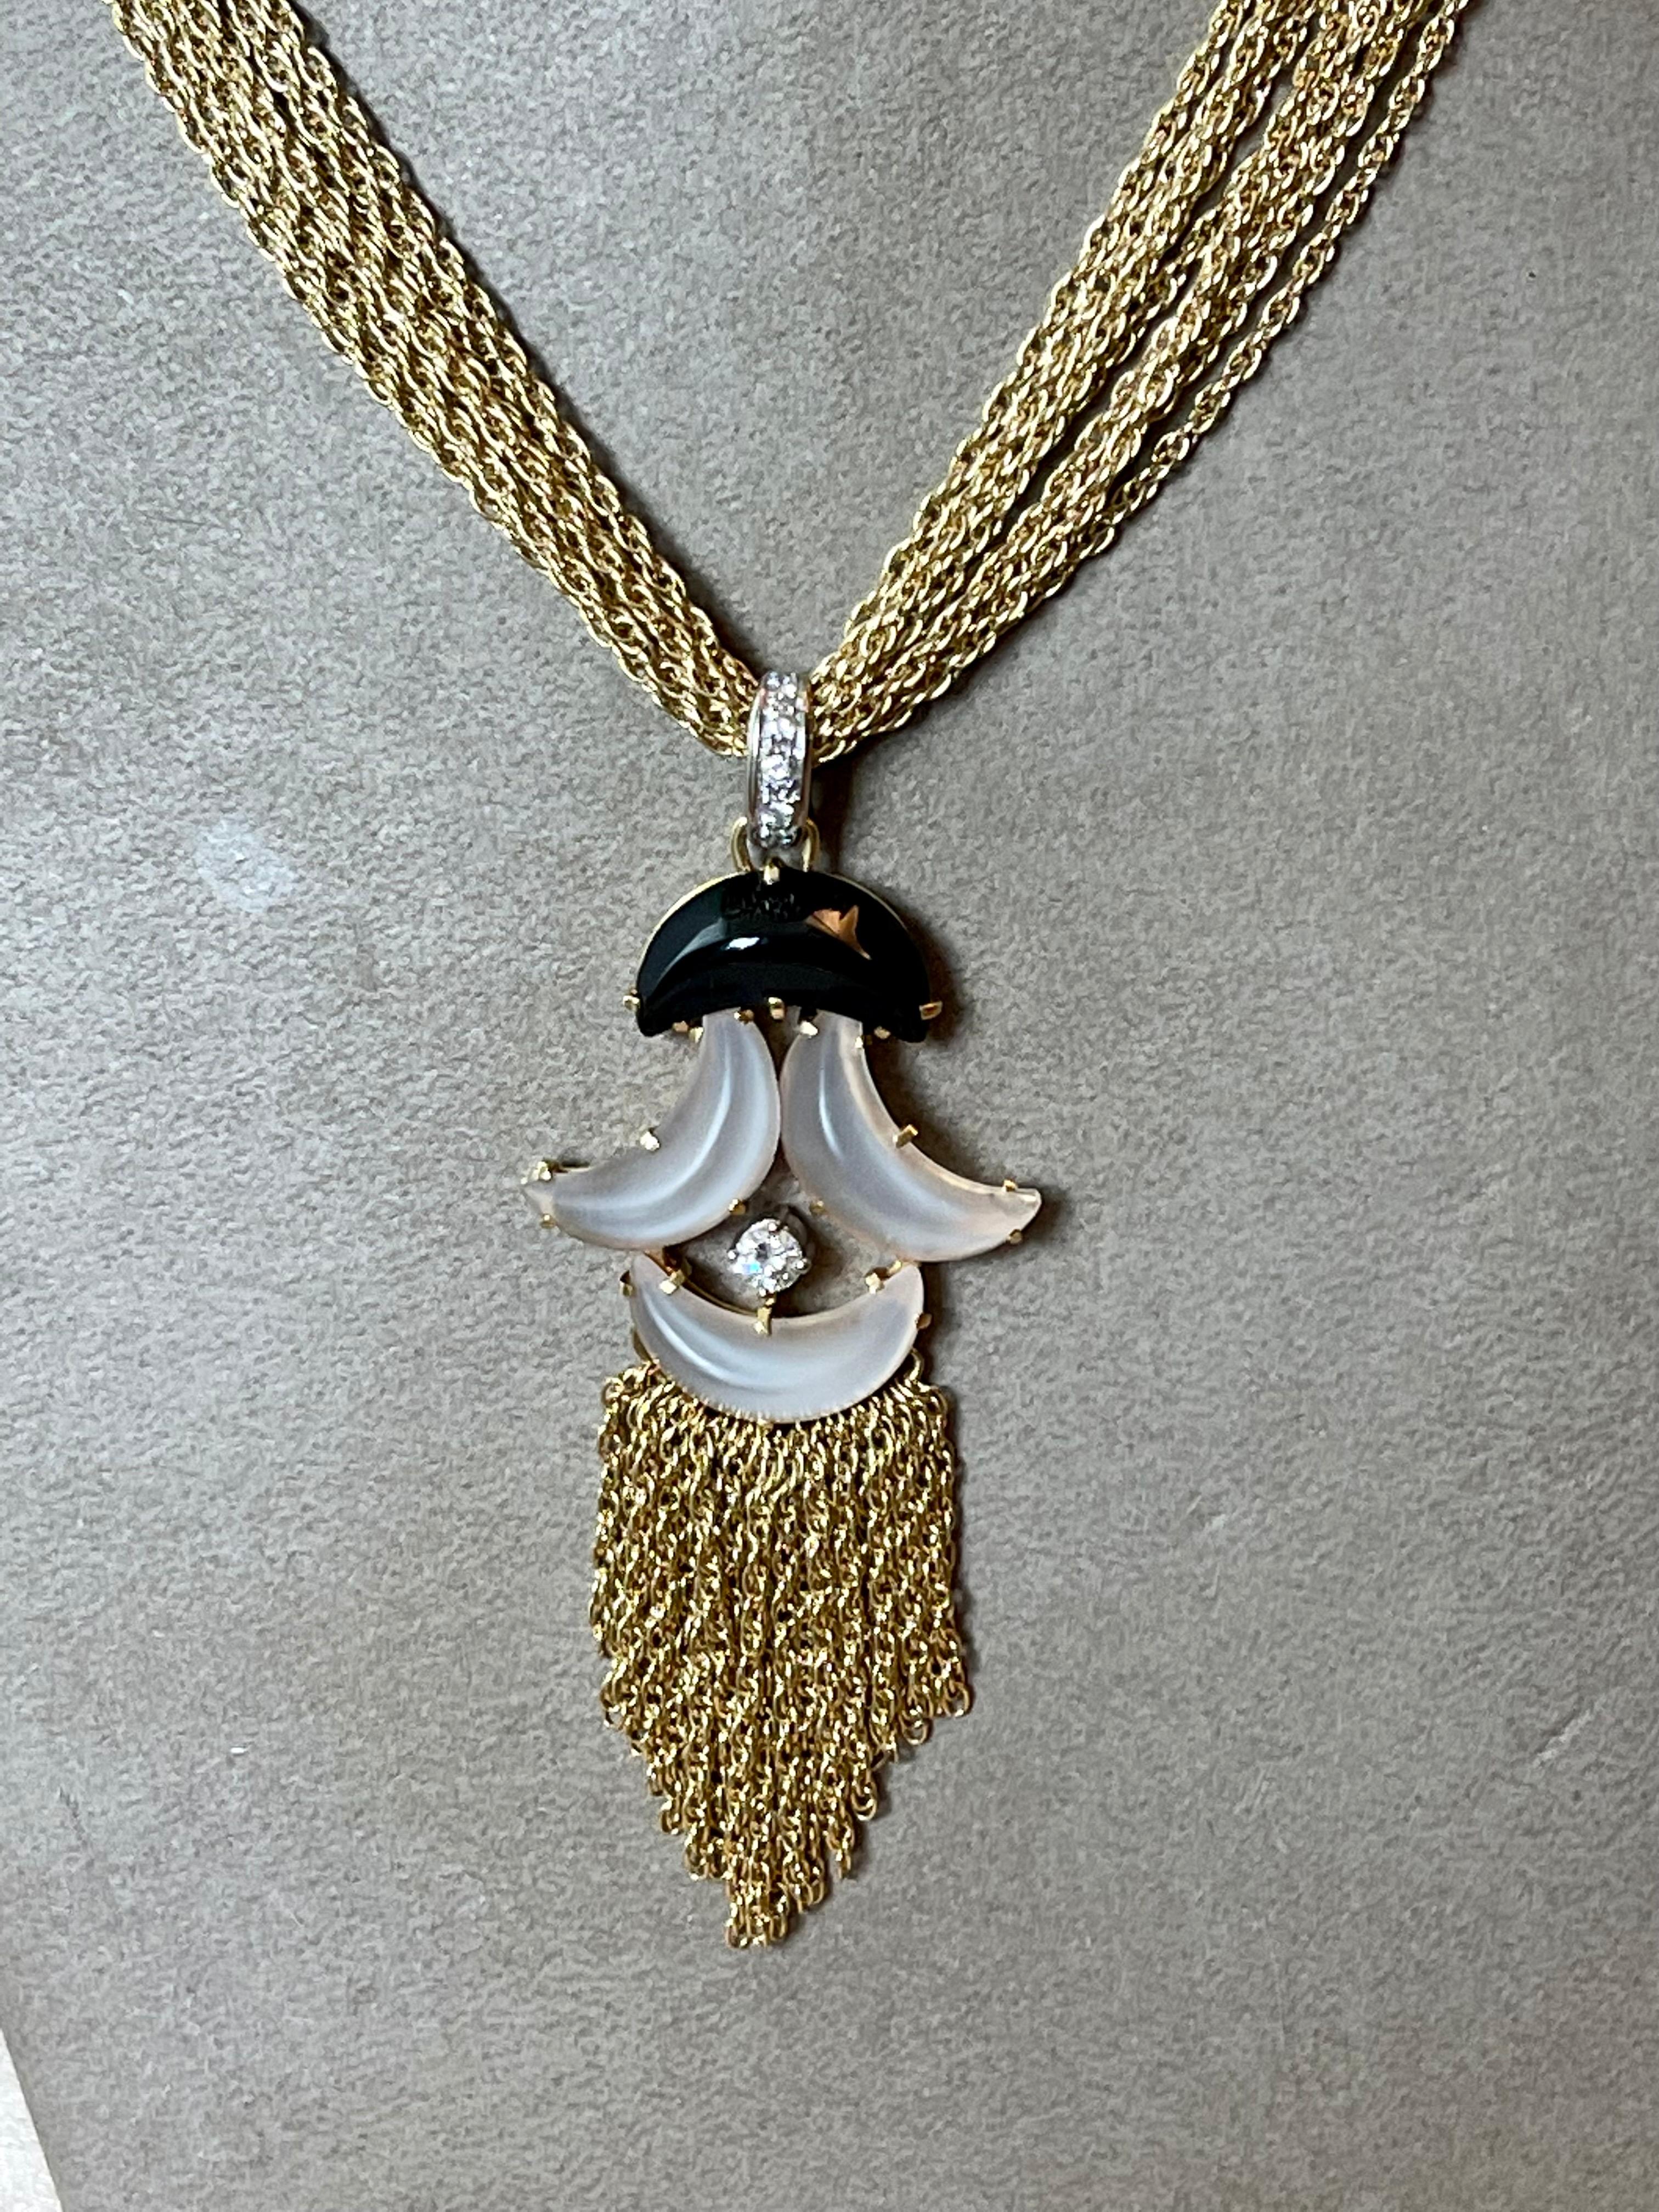 Vintage 18 K Yellow Gold Necklace Pendant Diamond Rock Crystal Onyx by Tännler In Good Condition For Sale In Zurich, Zollstrasse